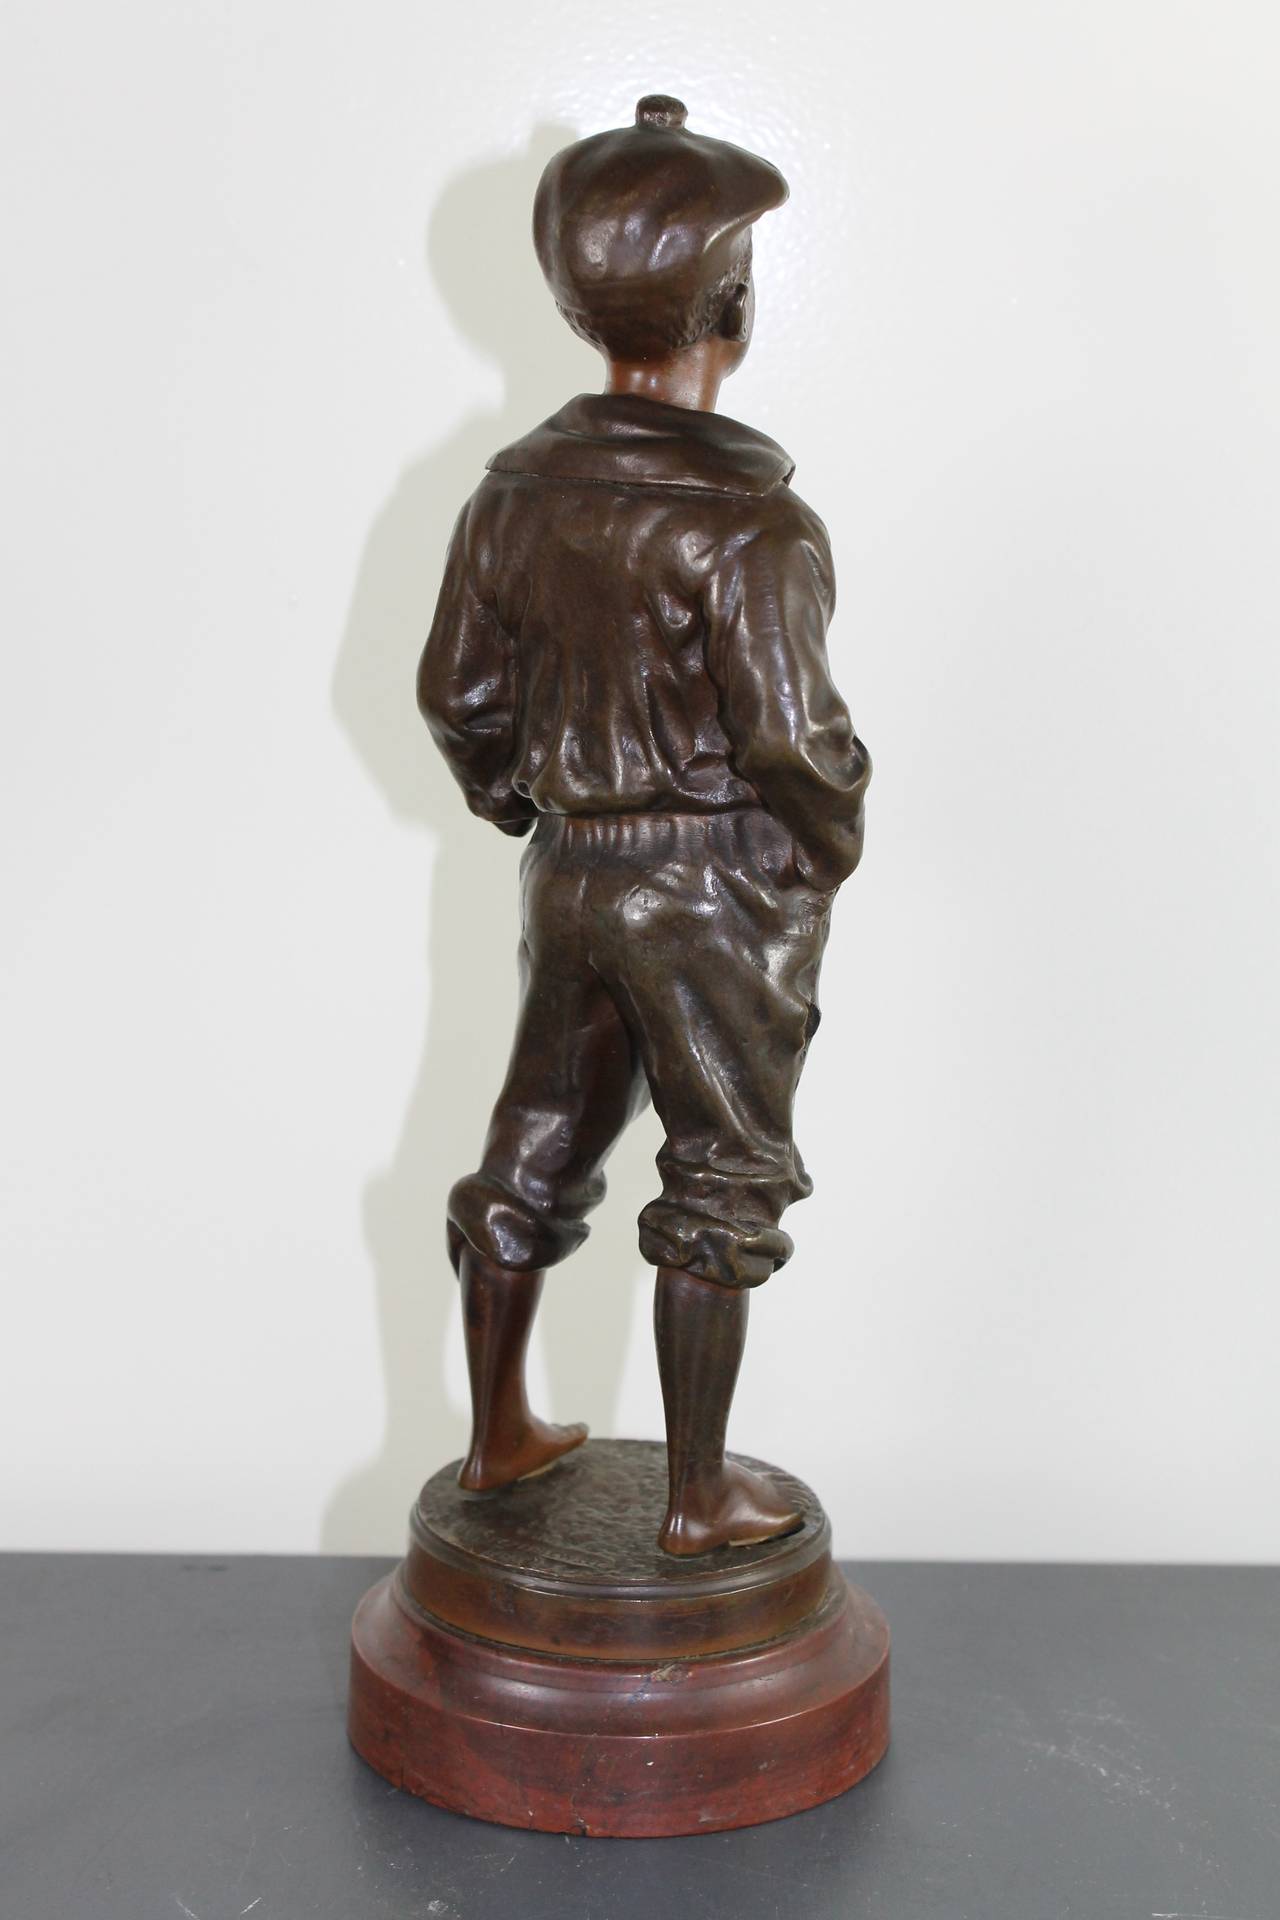 Polish Boy in Patinated Bronze, Signed and Dated